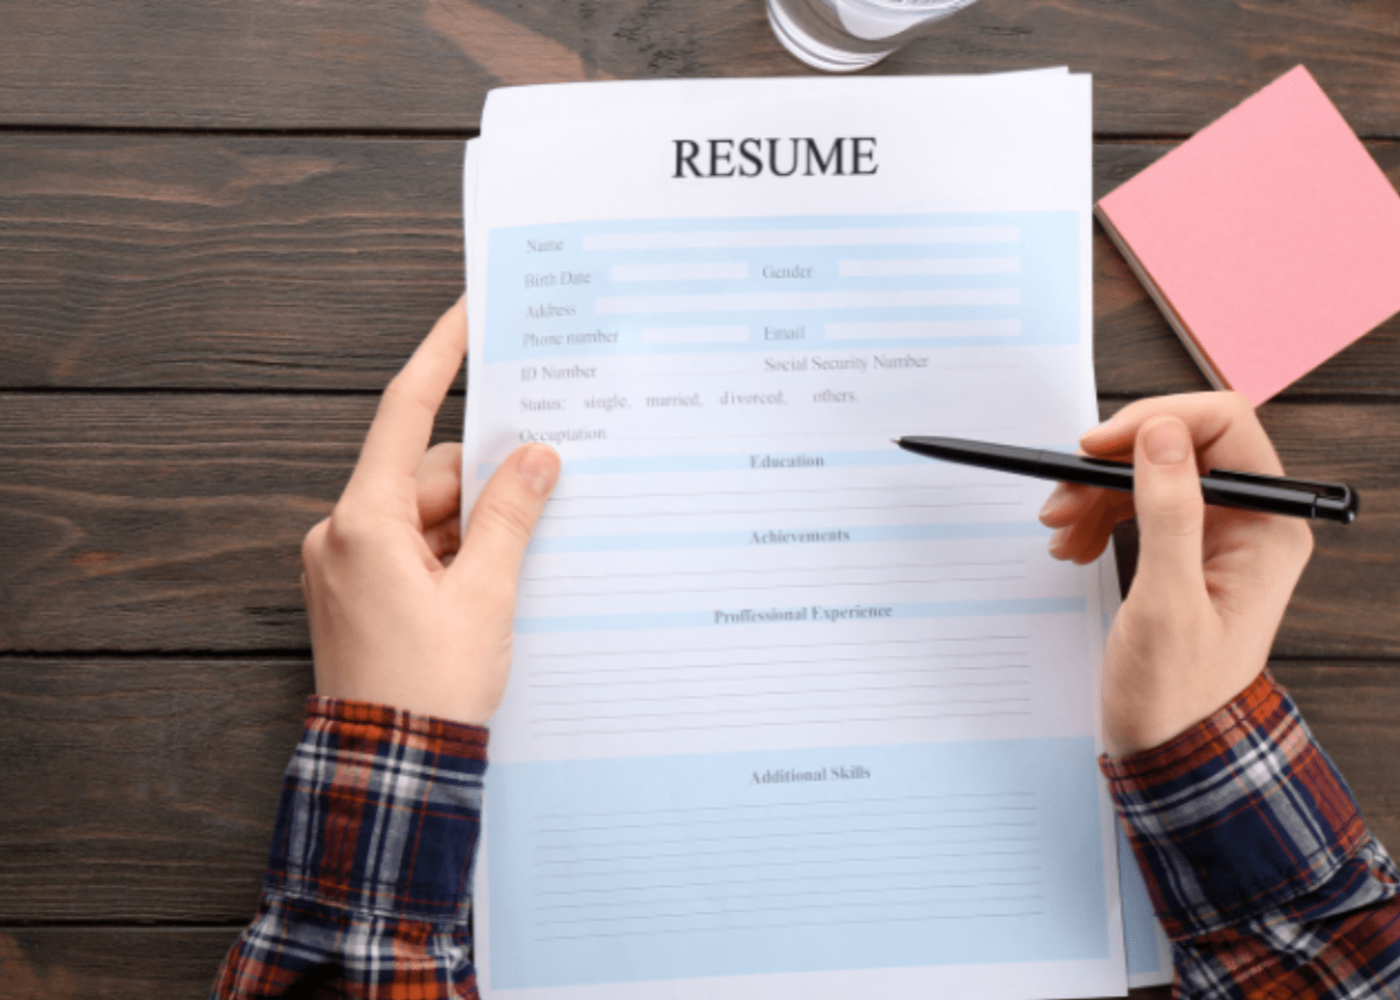 A person working on crafting their resume